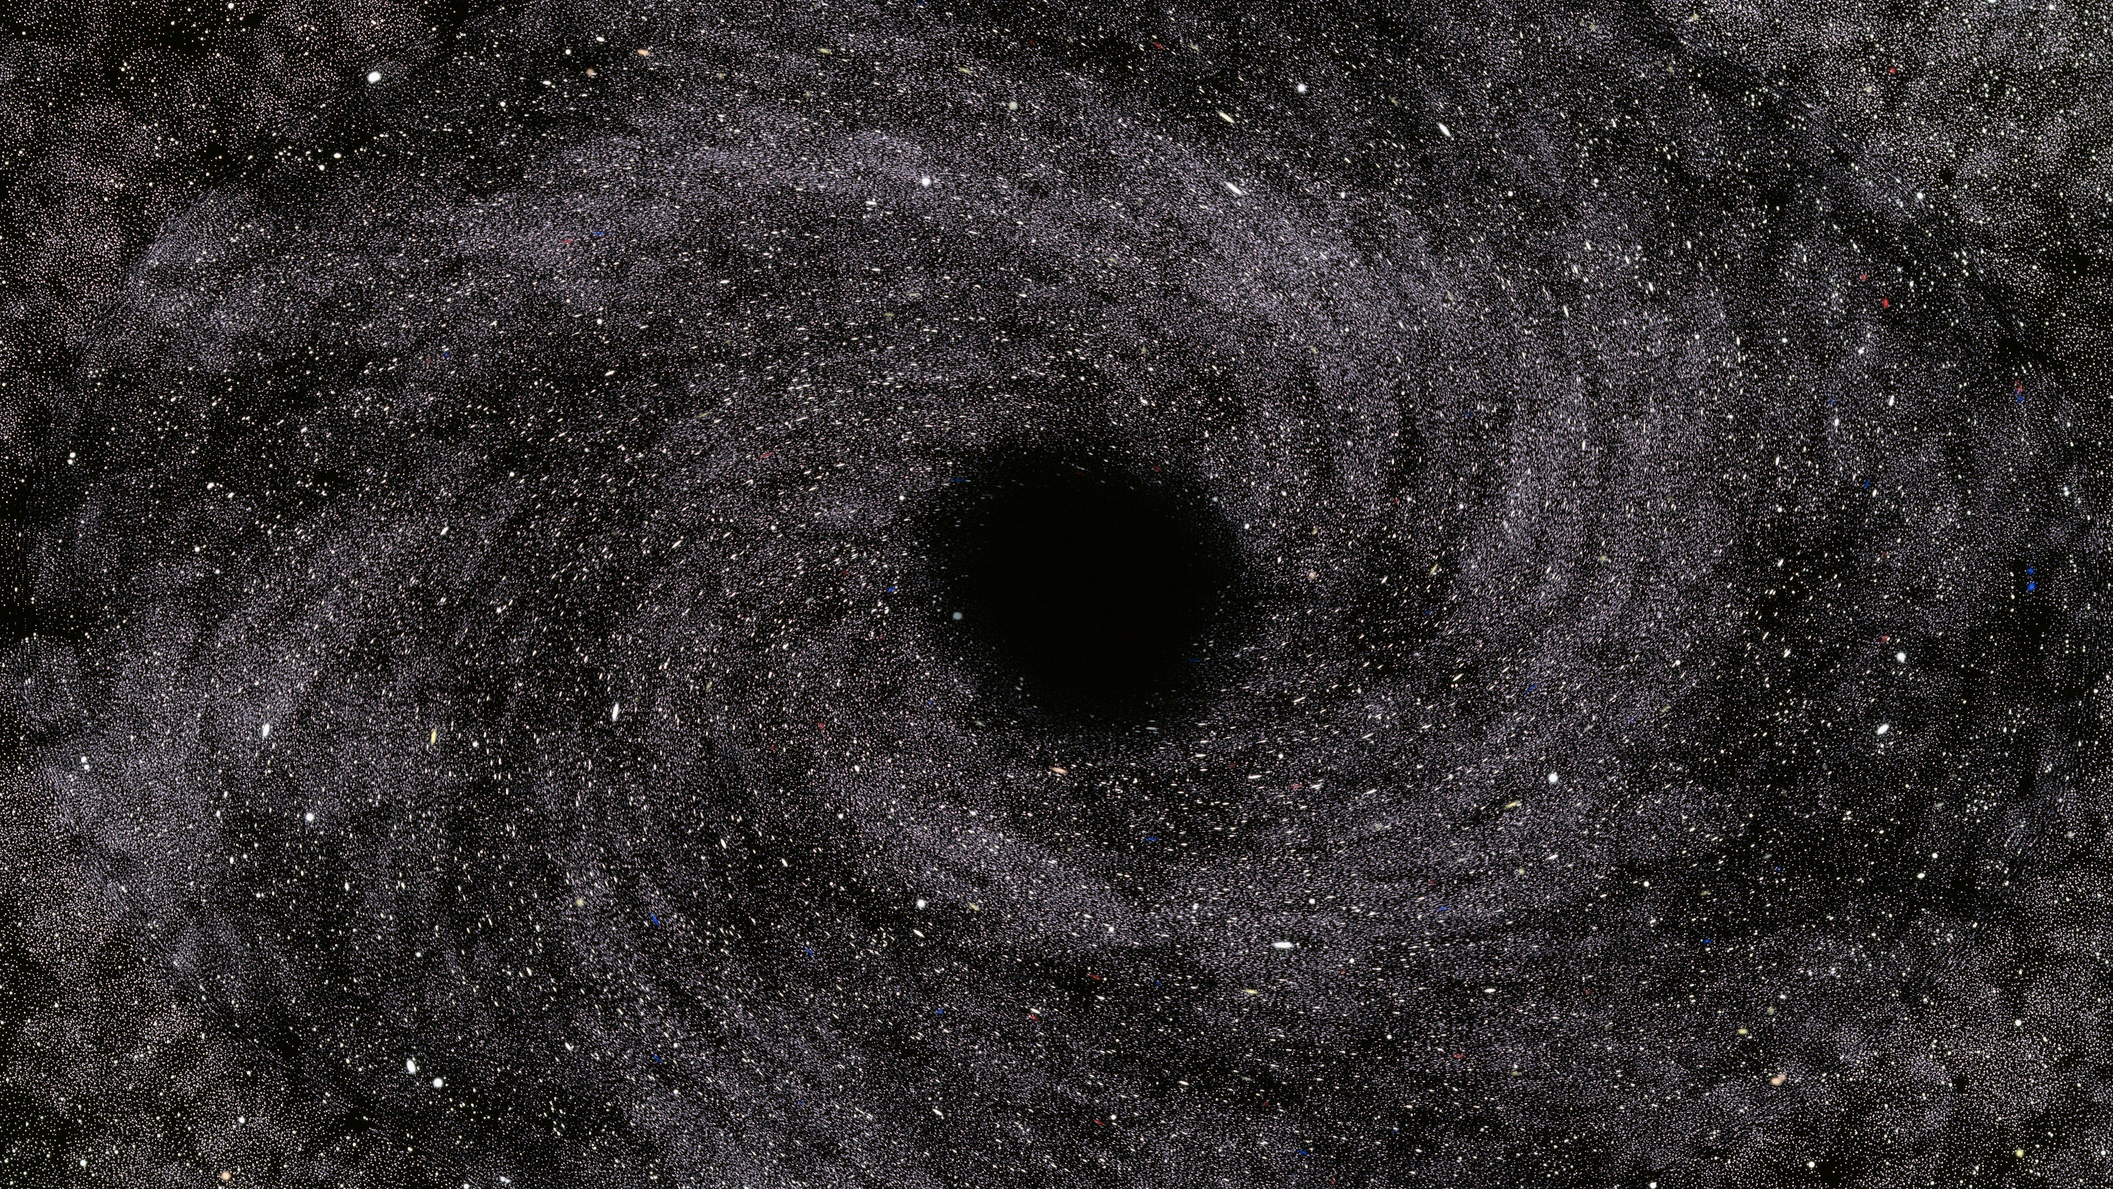 Artist's illustration black hole void surrounded by stars.